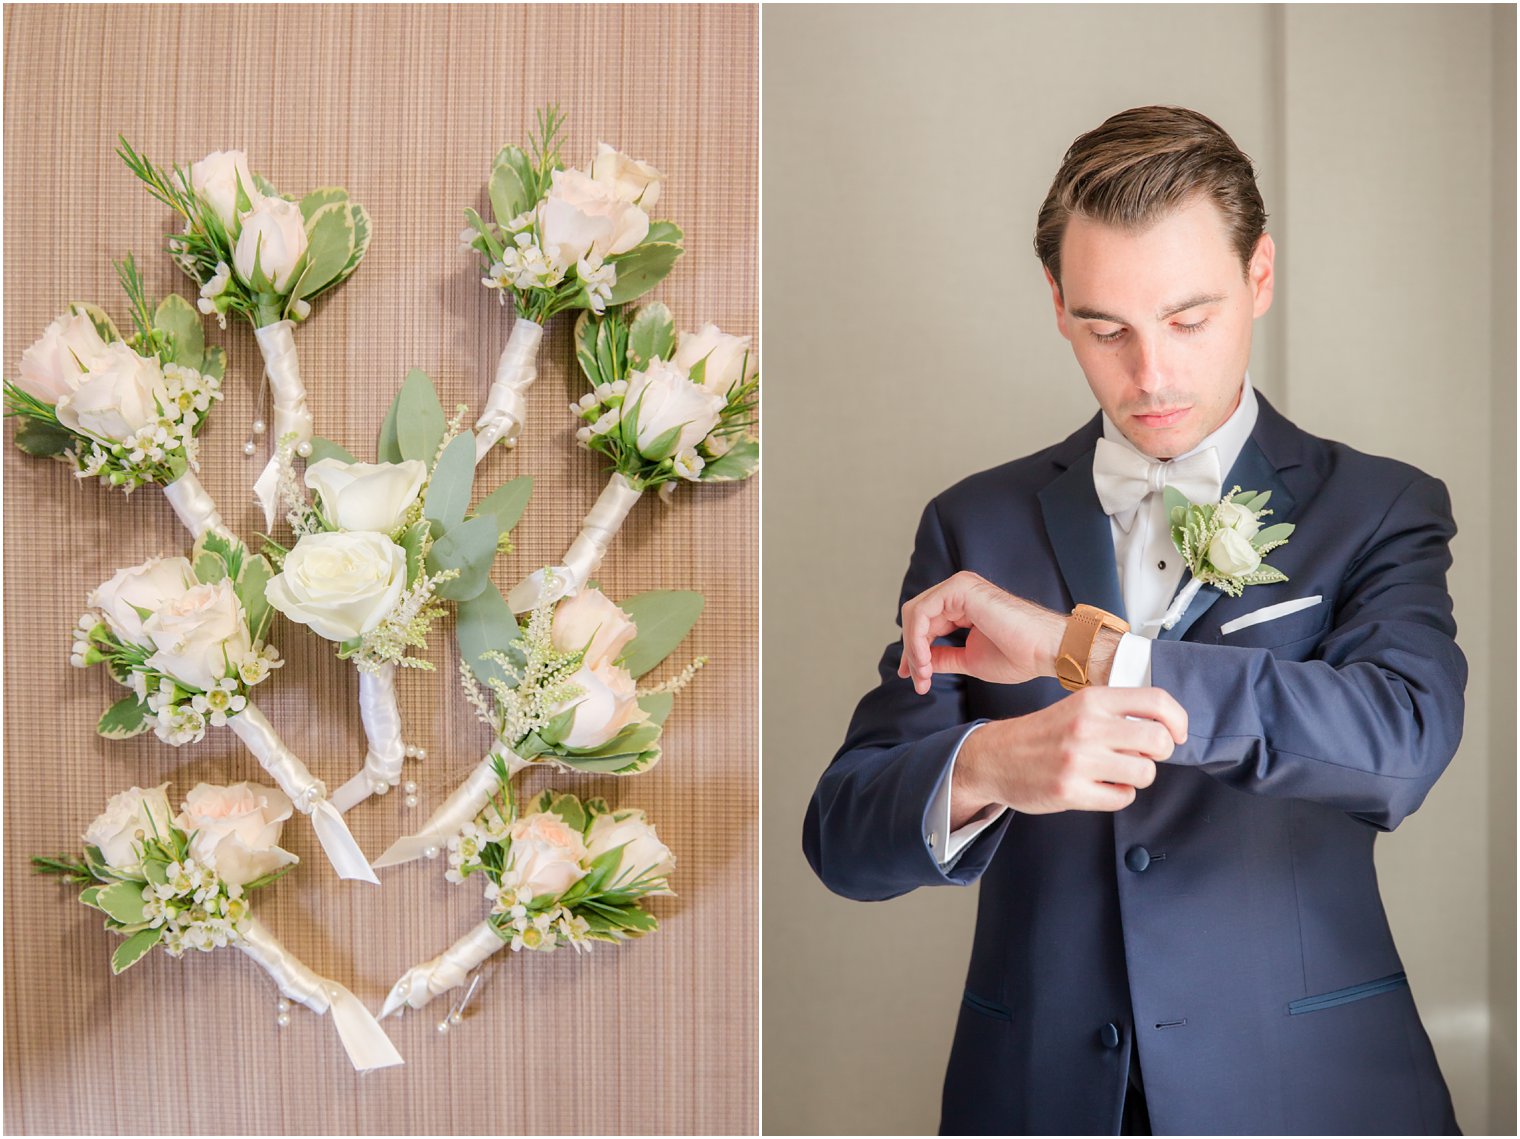 ivory rose boutonnières by Crest Florist and groom adjusting navy suit jacket photographed by Idalia Photography